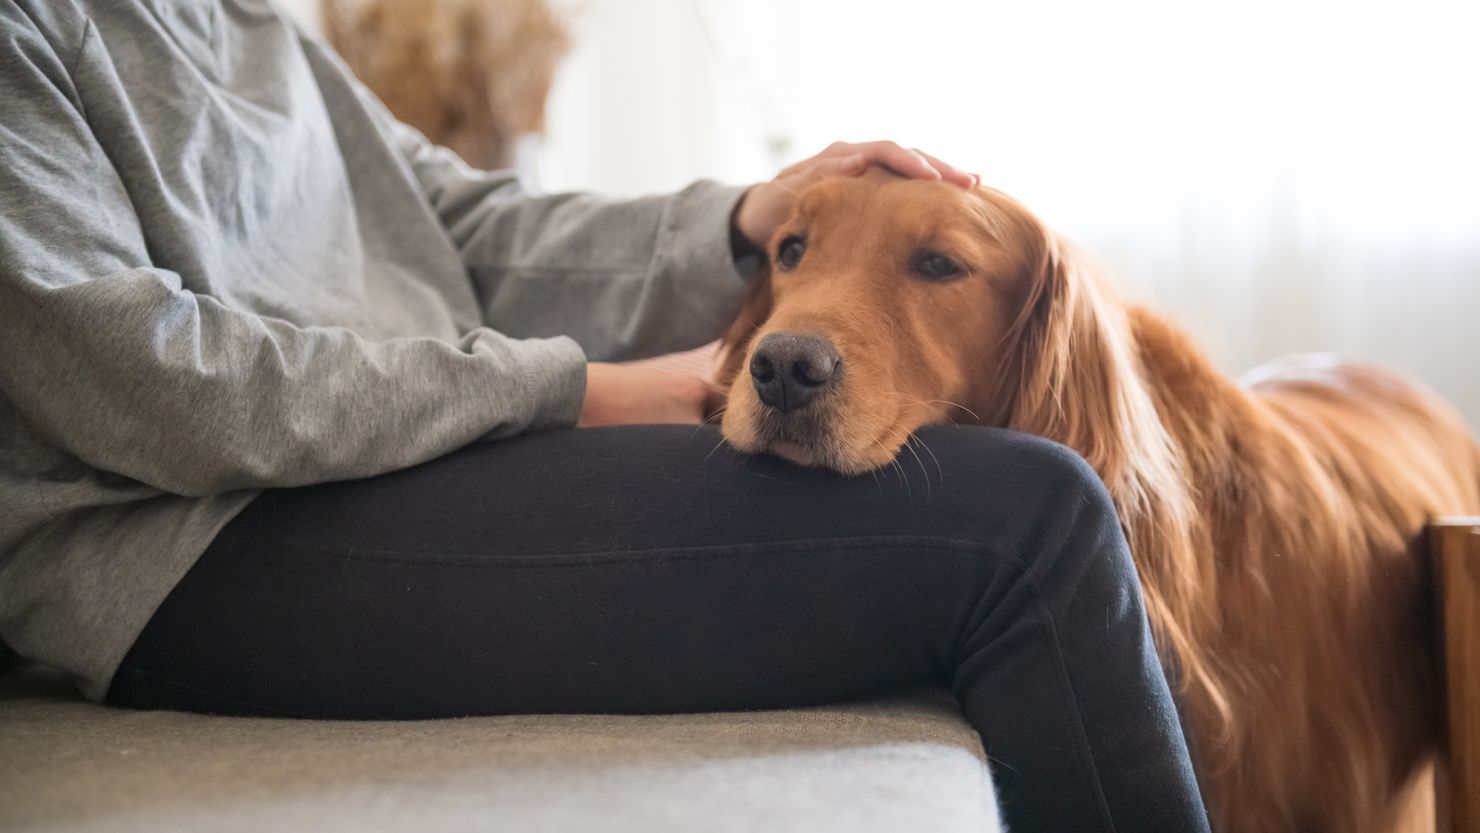 When you have a strong bond with your dog, it can often intuit your feelings — and offer you support, experts said.